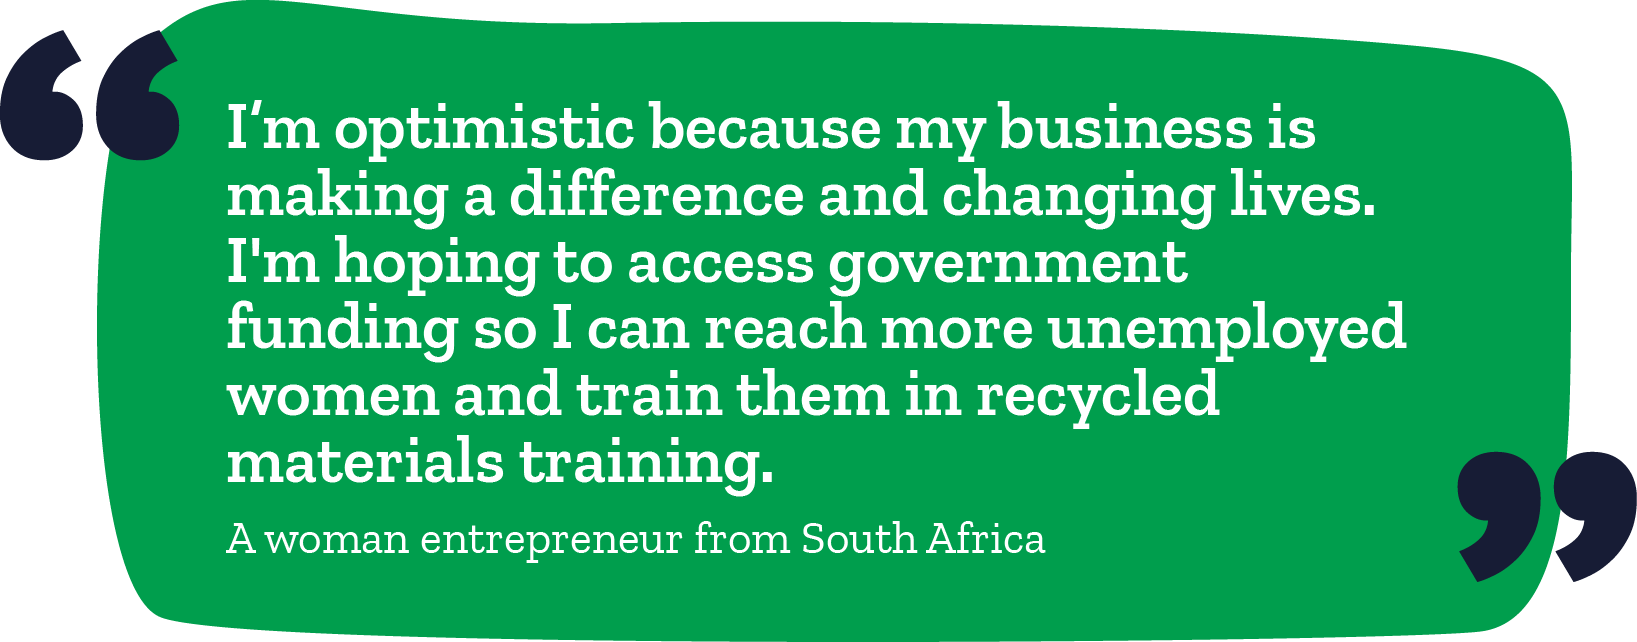 "I'm optimistic because my business is making a difference and changing lives. I'm hoping to access government funding so I can reach more unemployed women and train them in recycled materials training." -A woman entrepreneur from South Africa